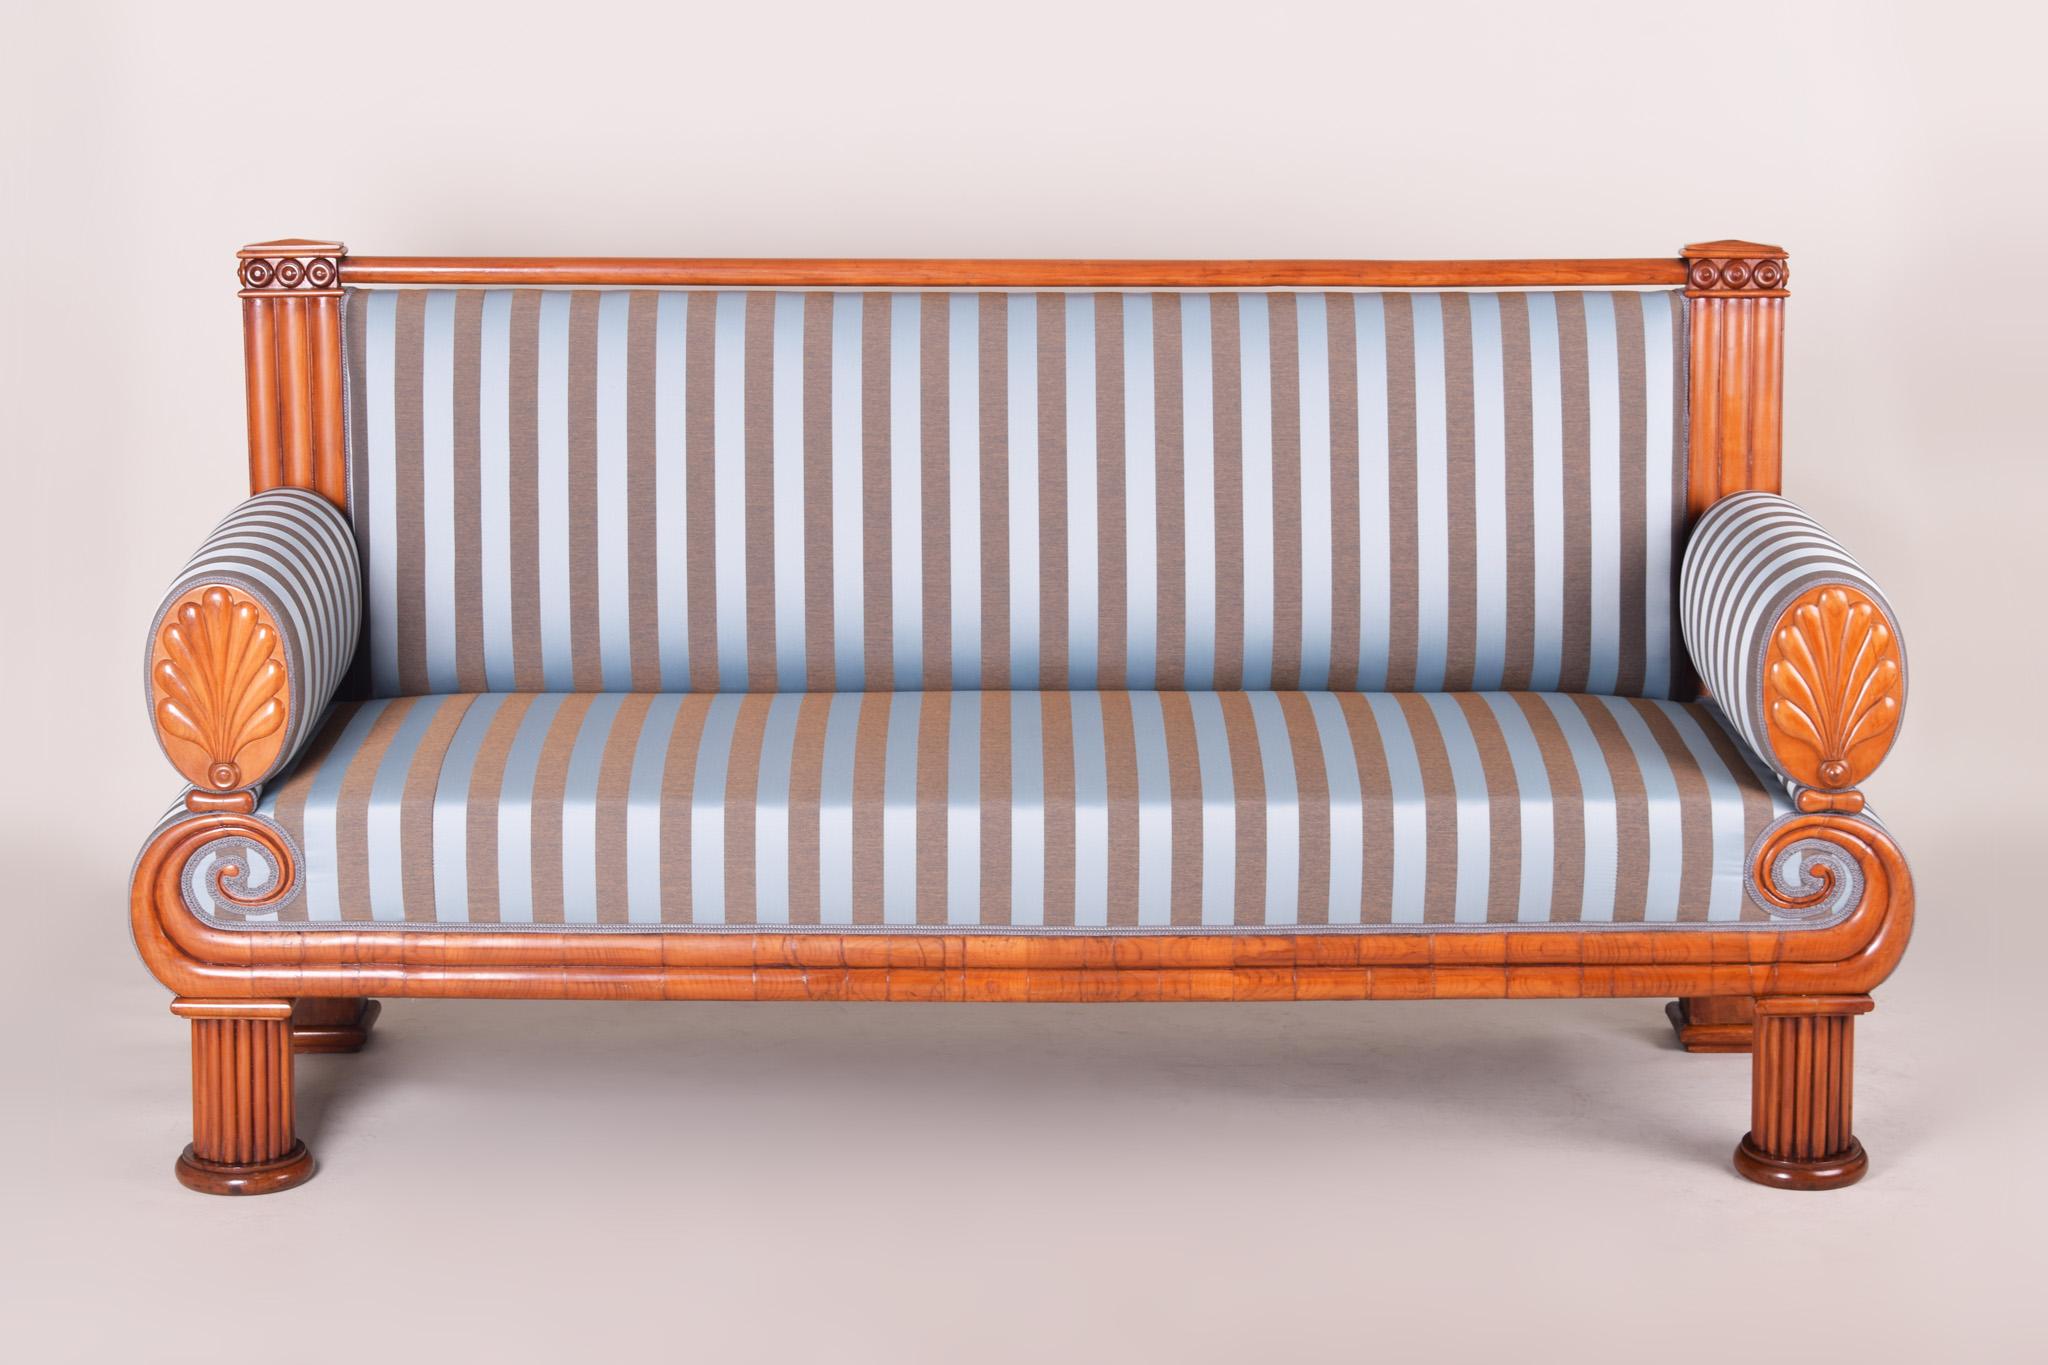 Biedermeier sofa
Completely restored, new upholstery included
Shellac polish.
Source: Czech
Period: 1820-1829.